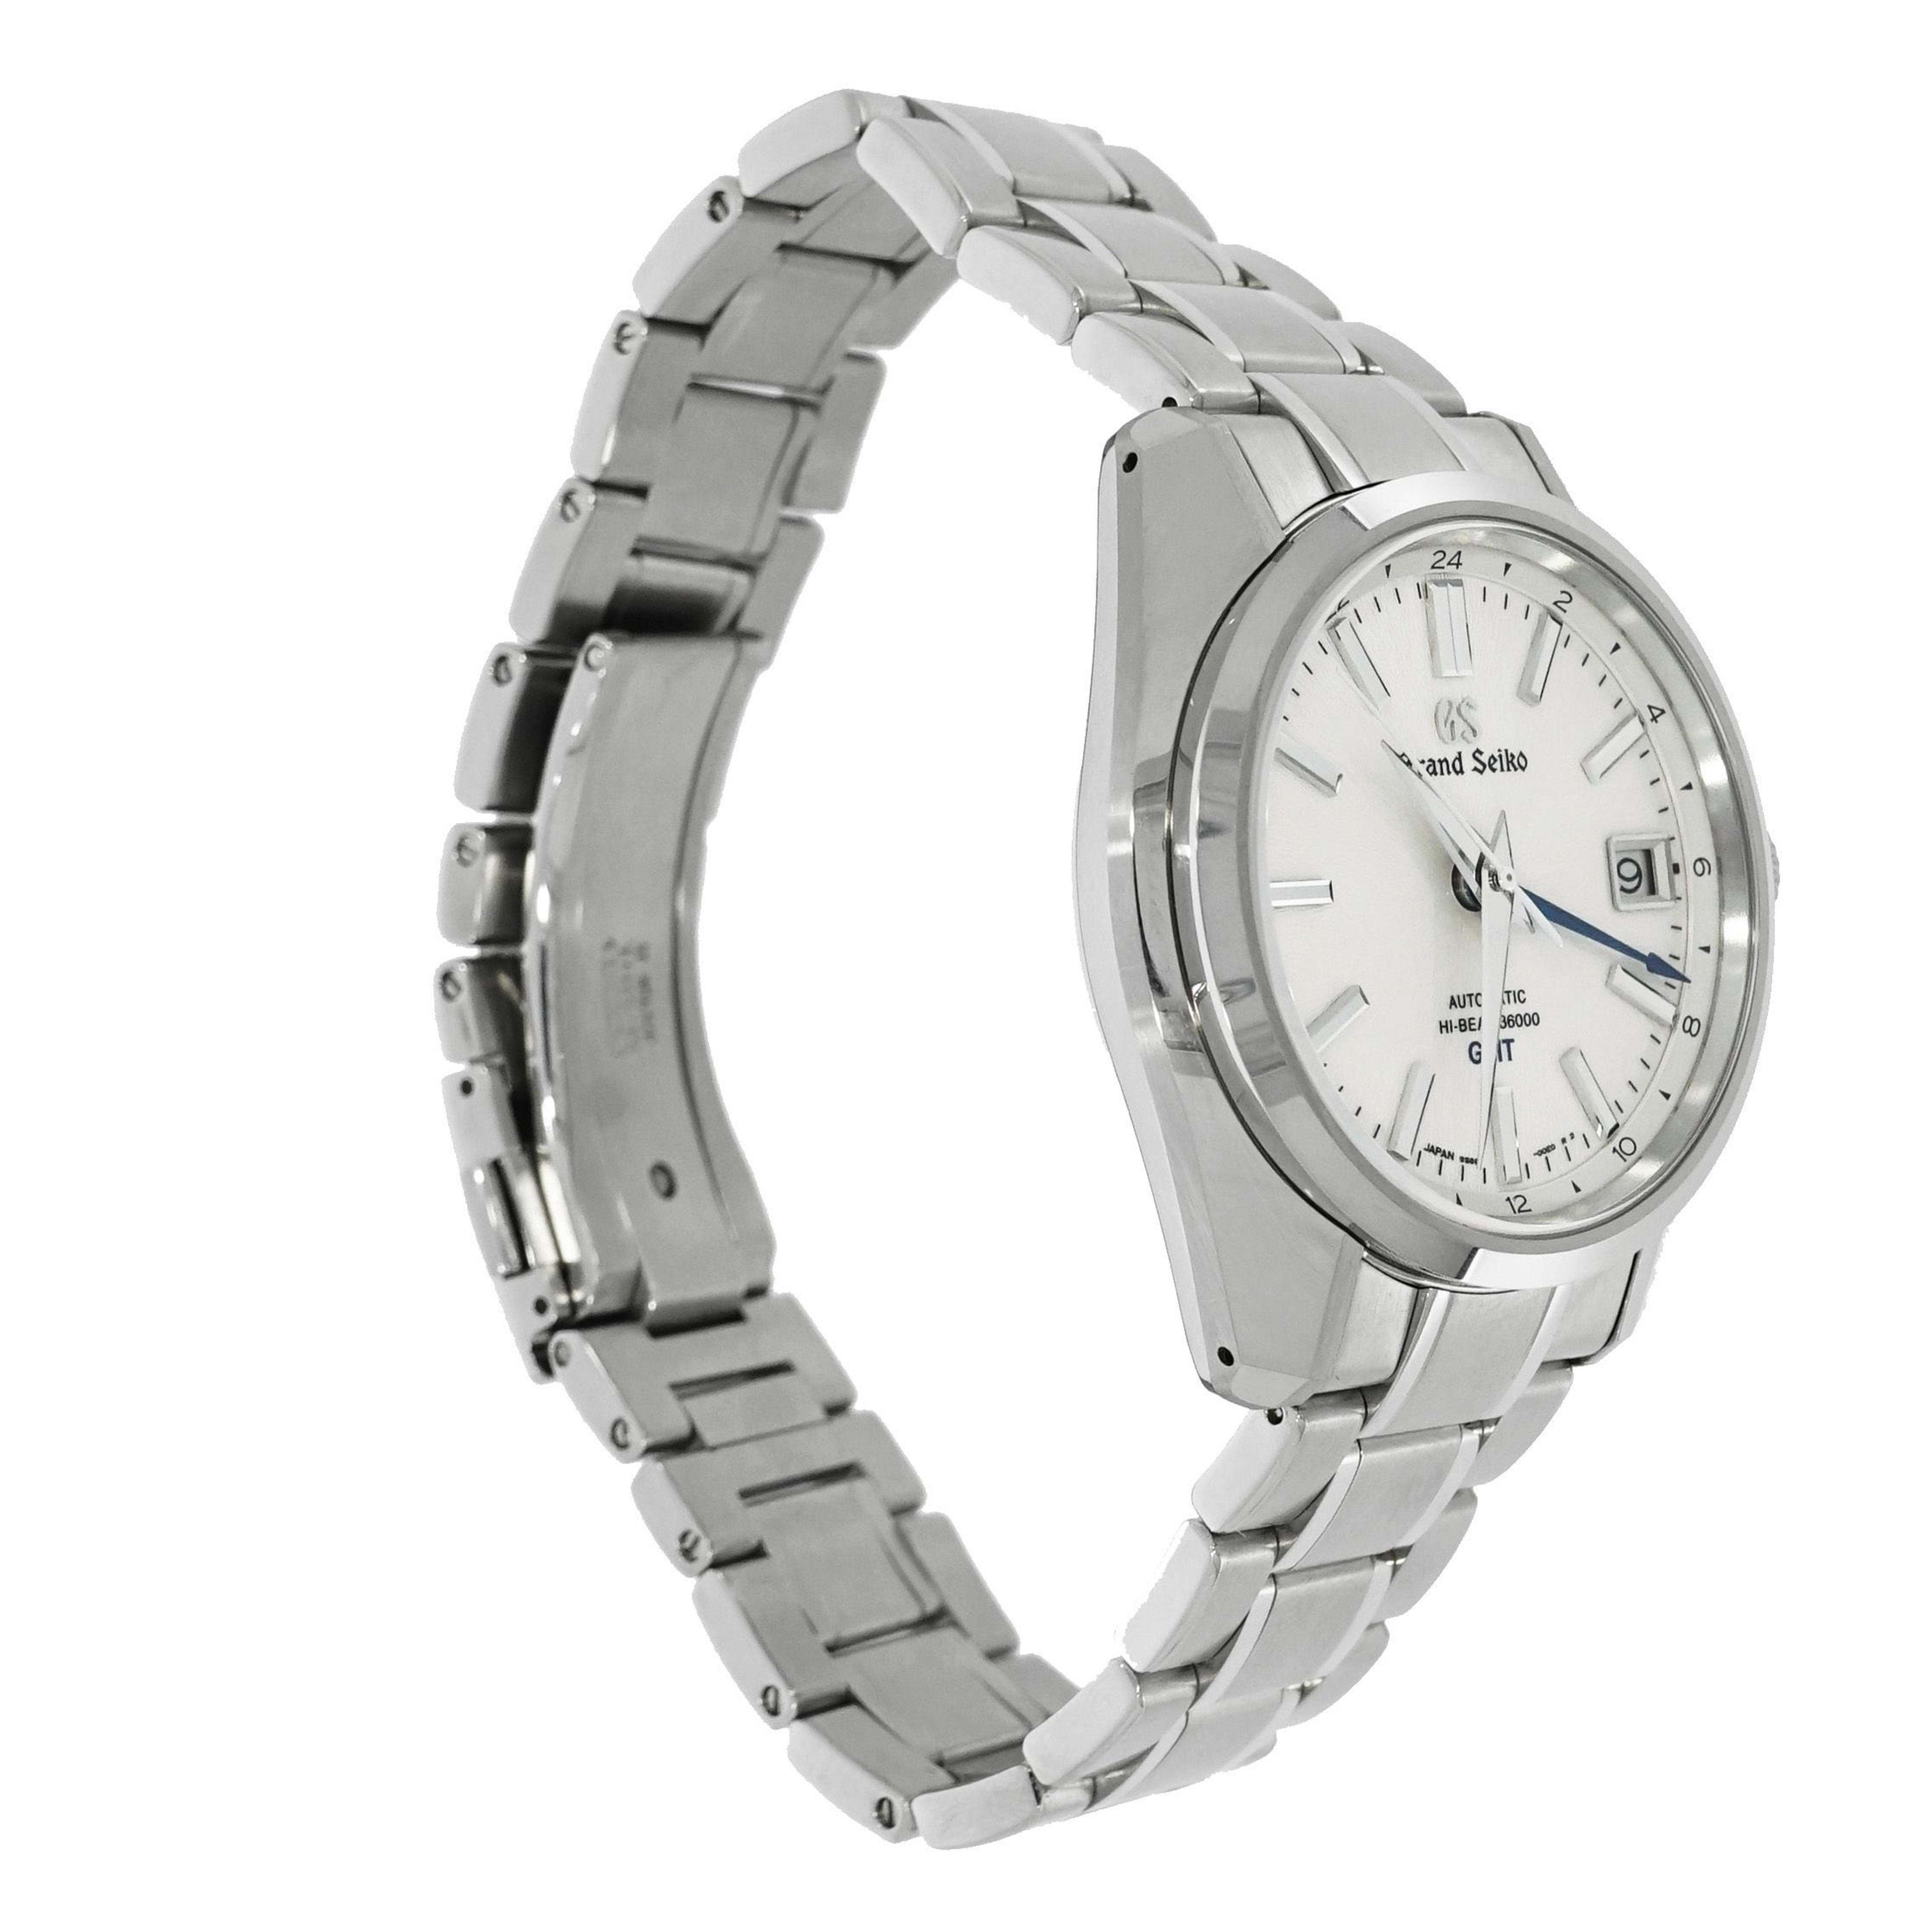 Grand Seiko was established in 1960 to pursuit their goal of creating the ‘ideal’ watch. 
The emphasis was on standard of precision, durability and beauty.
This Stainless Steel Grand Seiko GMT Hi-Beat (SBGJ201), features a silver dial inspired by